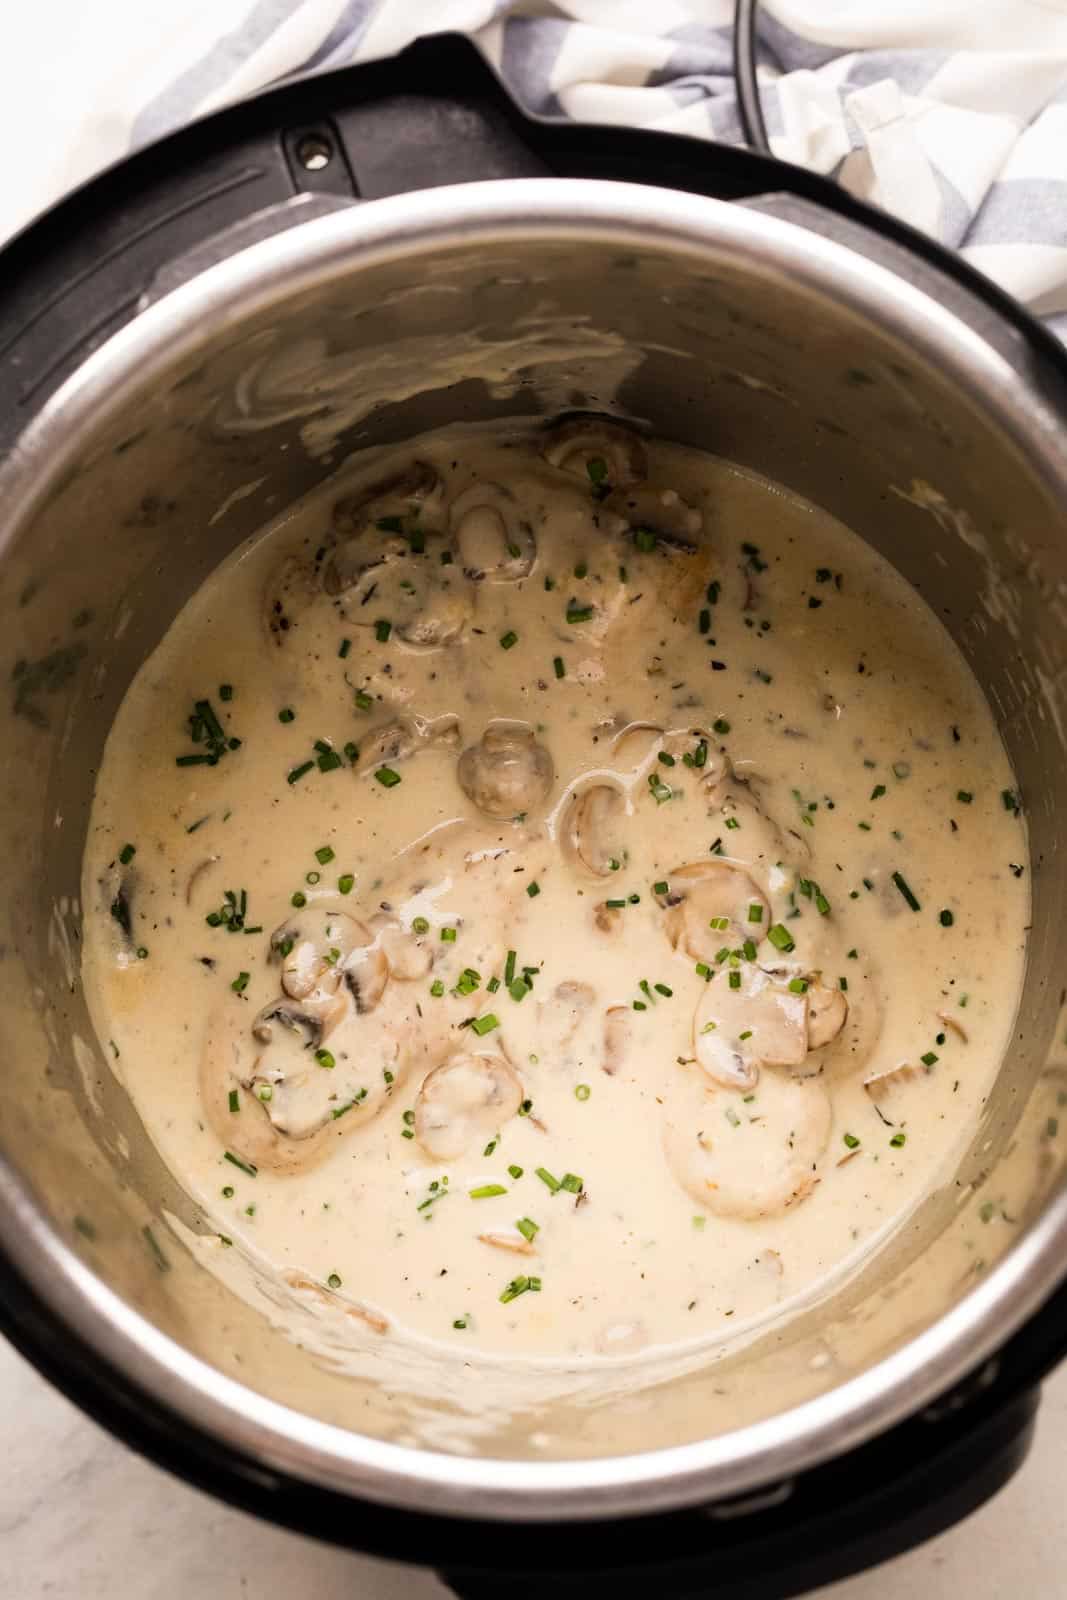 Chicken in mushroom sauce pictured in the Instant Pot once it was cooked